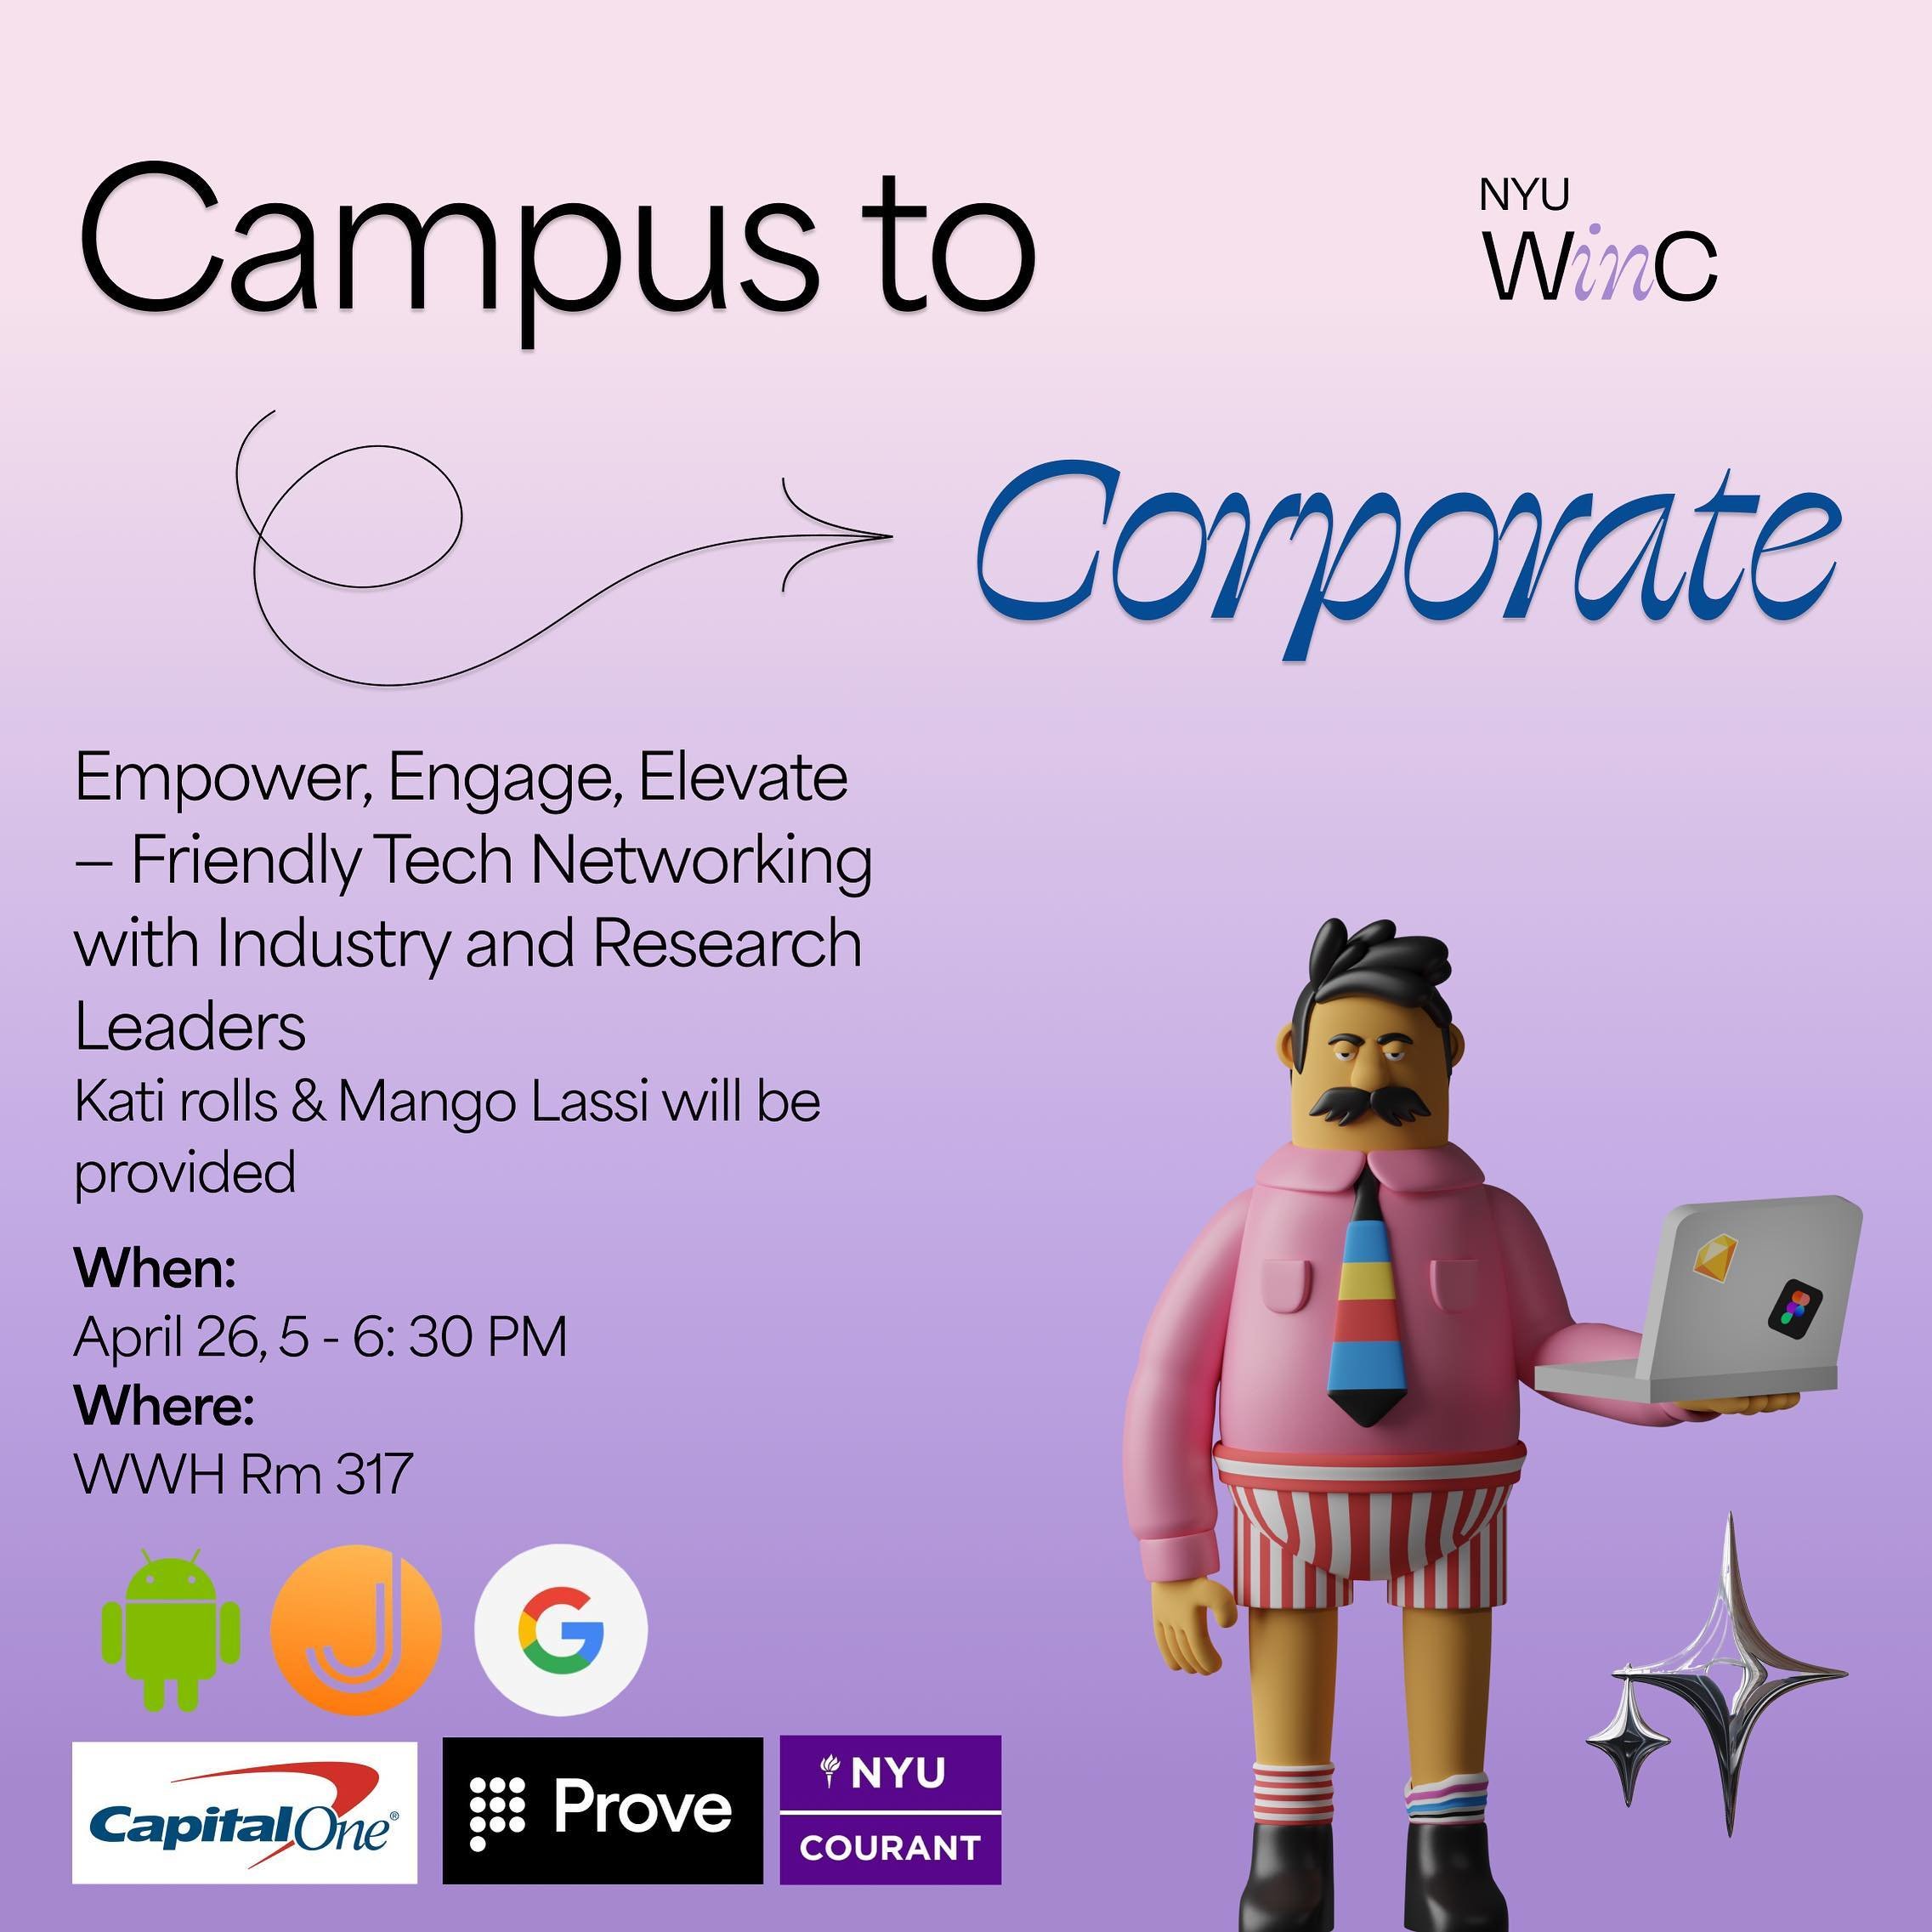 🌟‼️ THIS WEEK ‼️🌟
Are you trying to get your networking/professional development on? This week, WinC is holding a networking event where students will get to meet with leaders in research and the tech industry. We will also be having snacks of cour